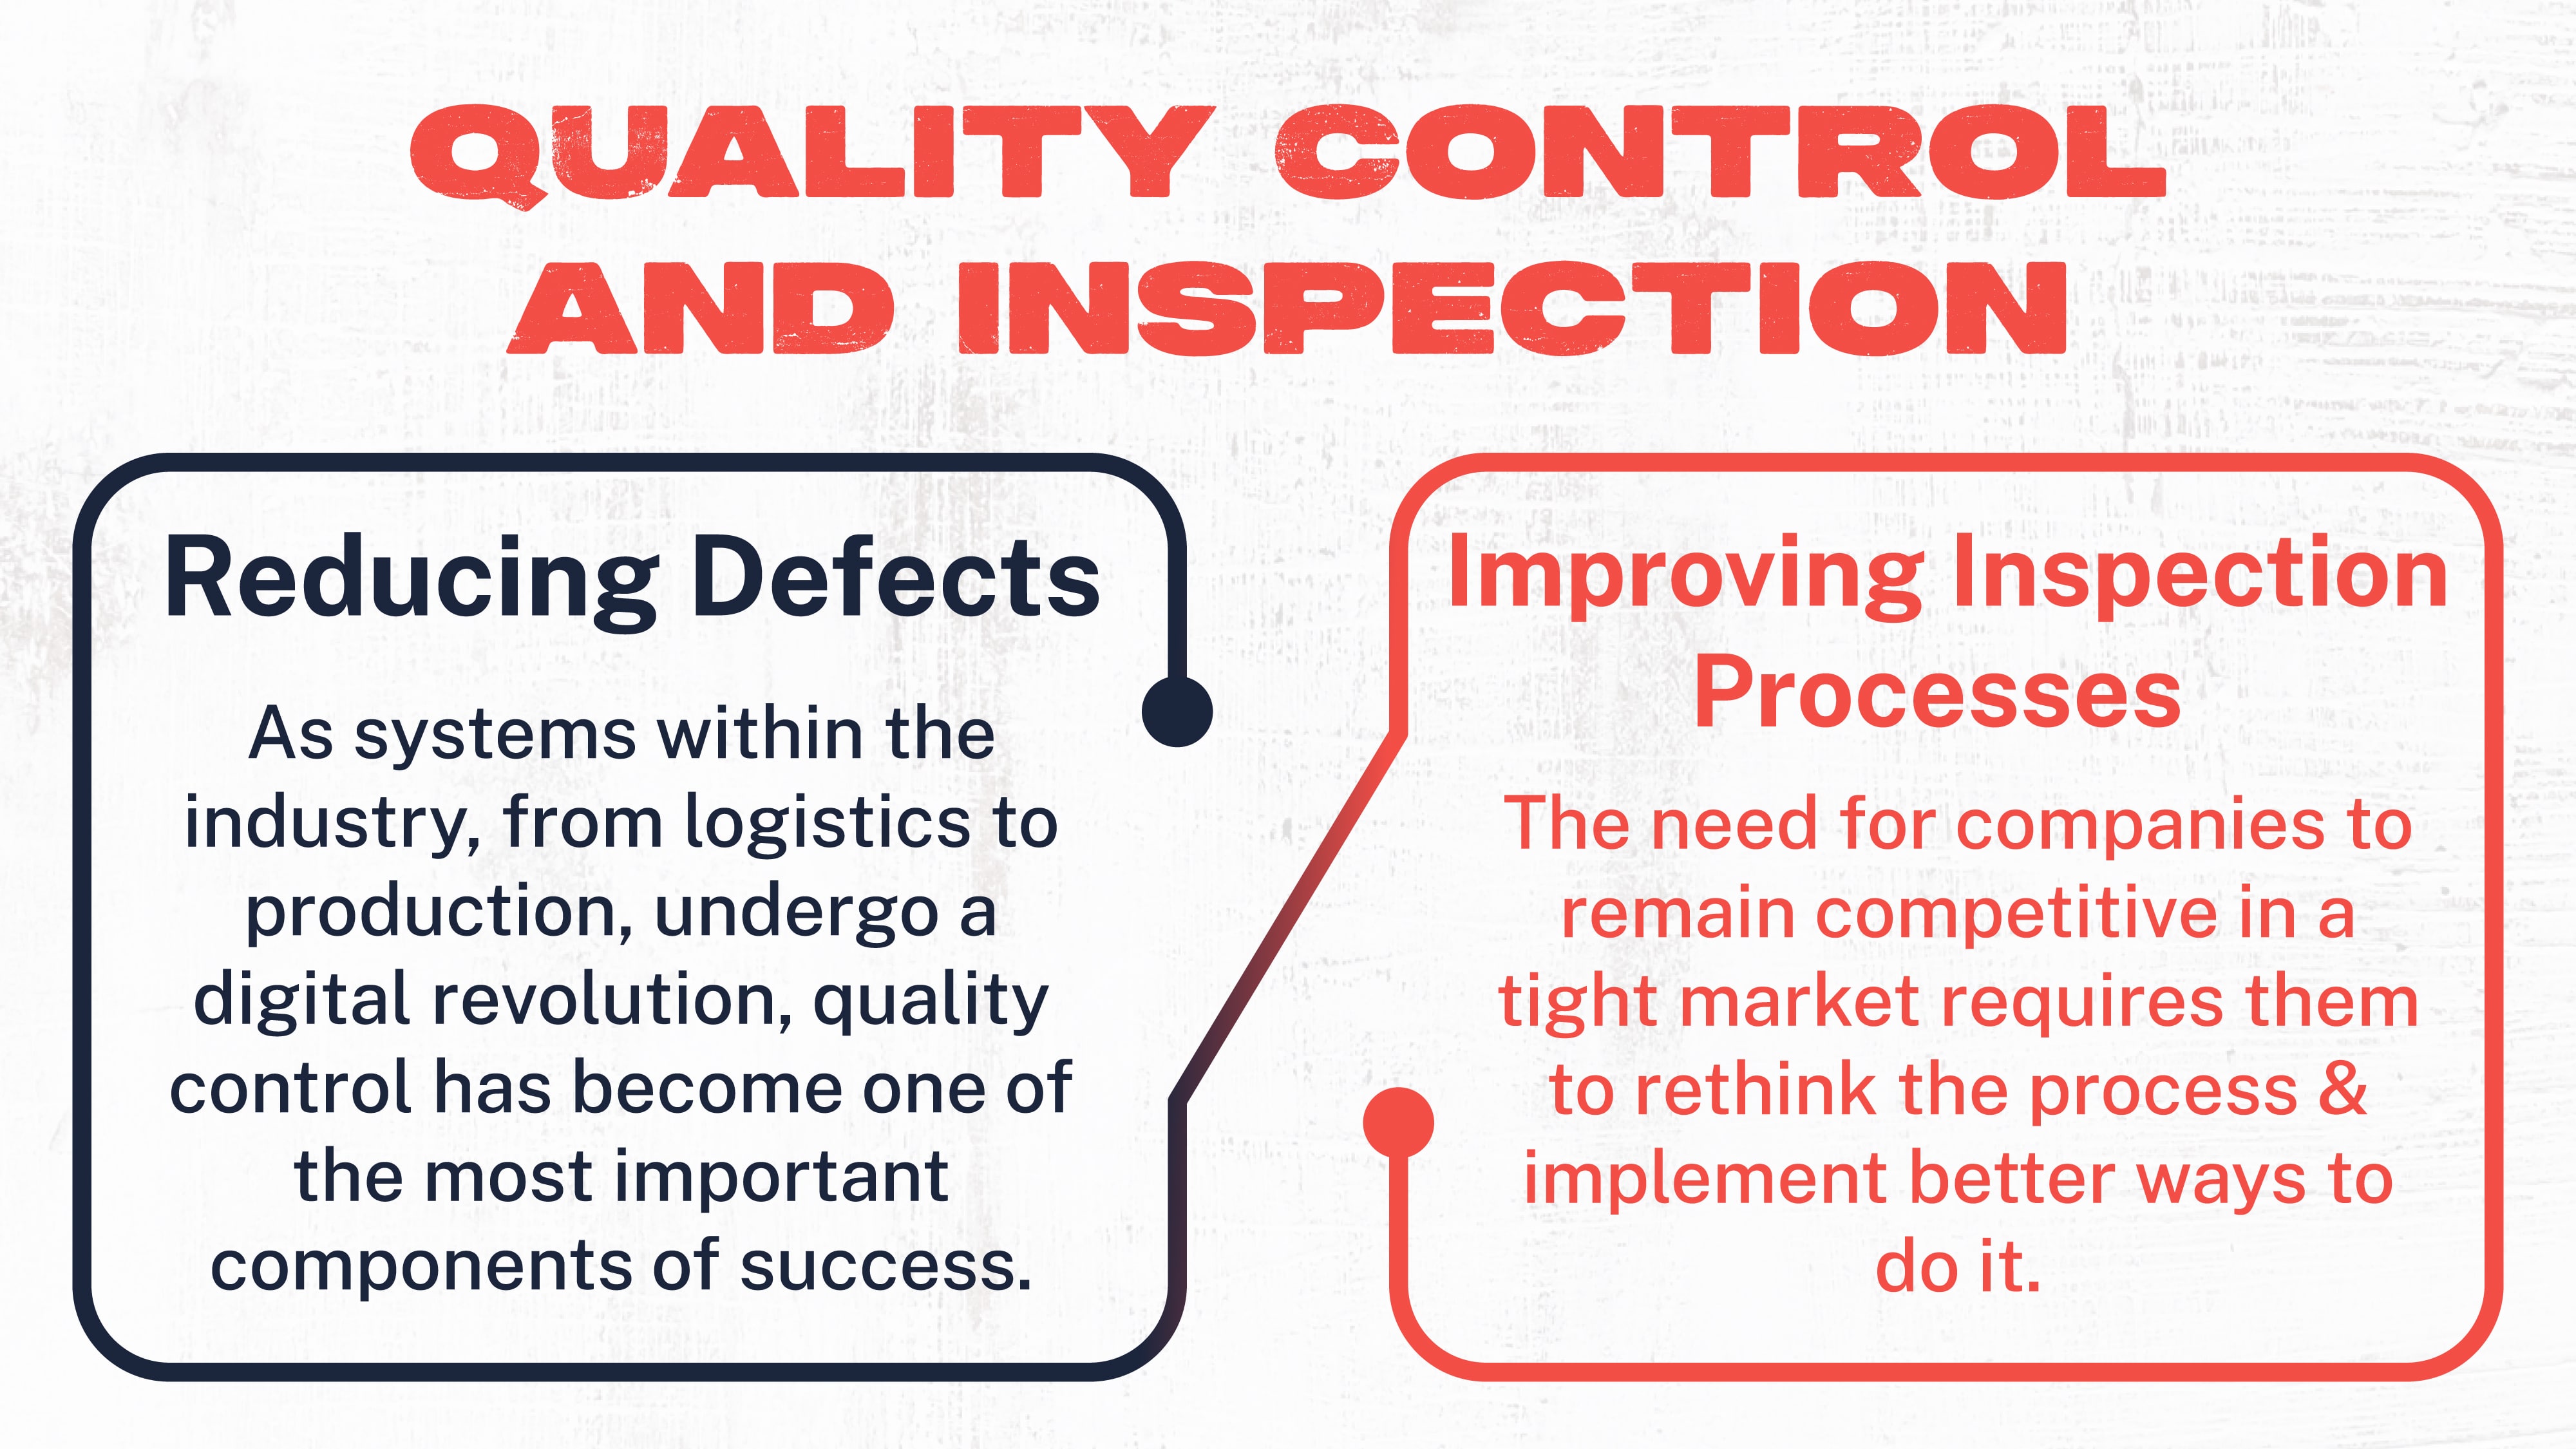 Quality Control & Inspection